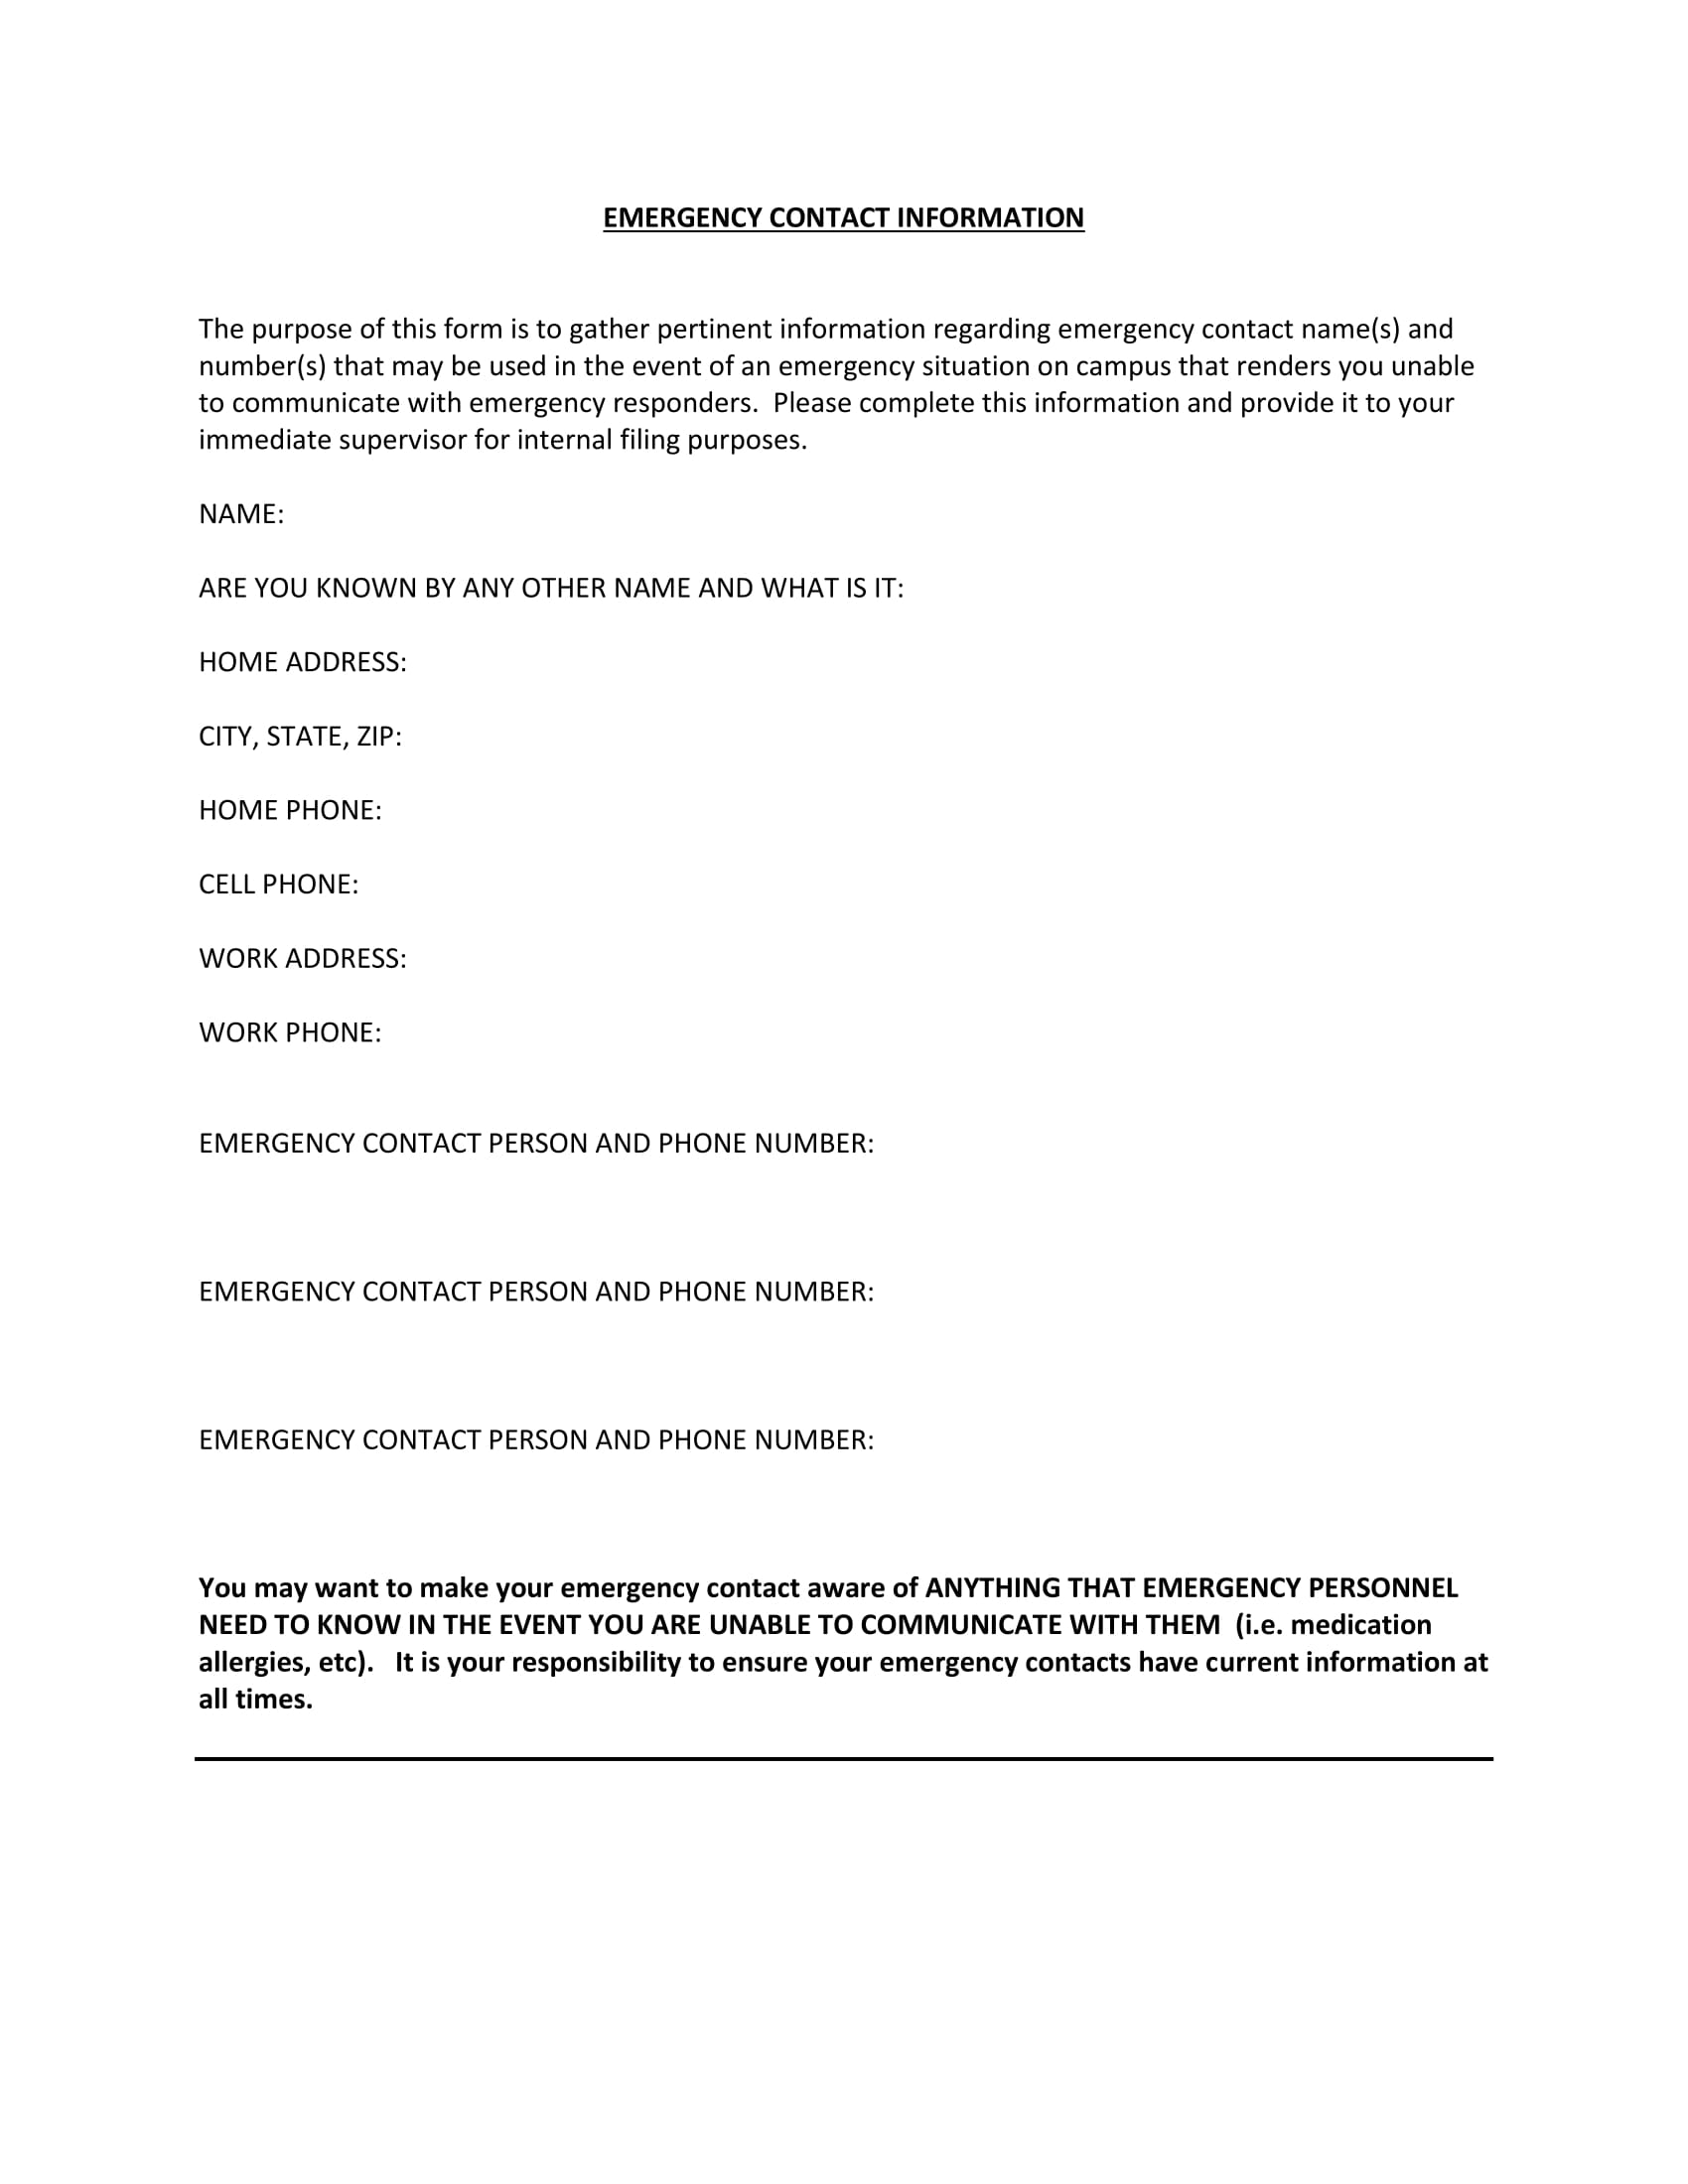 basic emergency contact information form 1